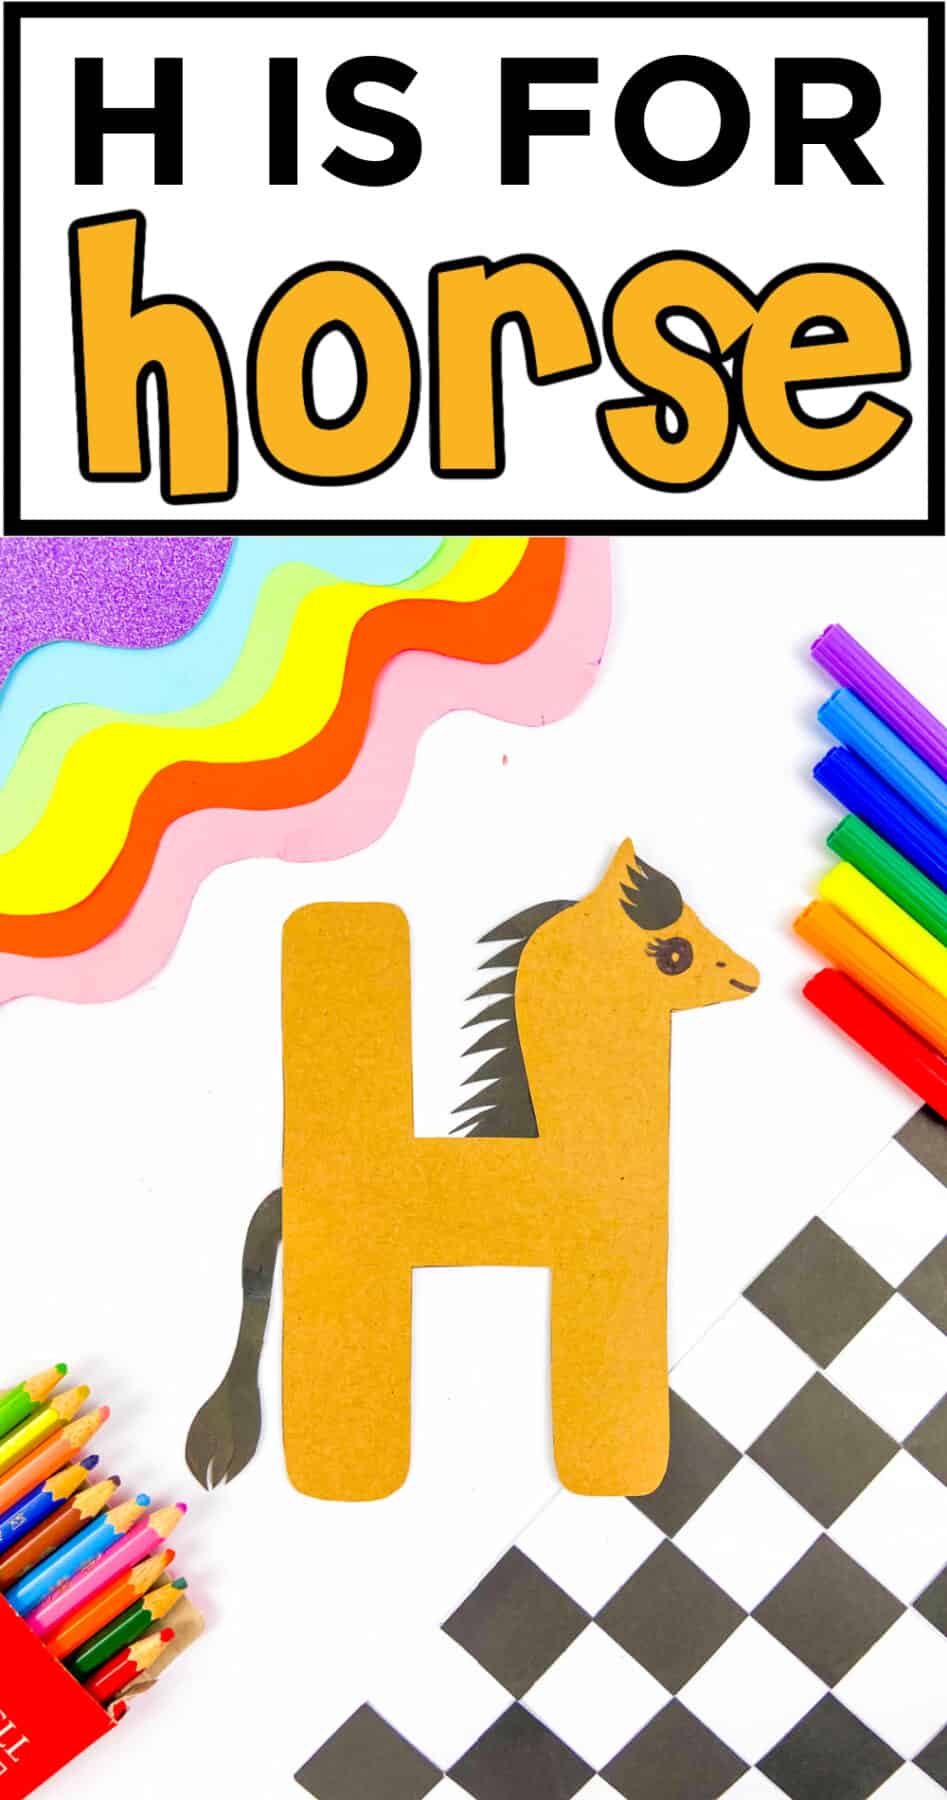 h is for horse printable